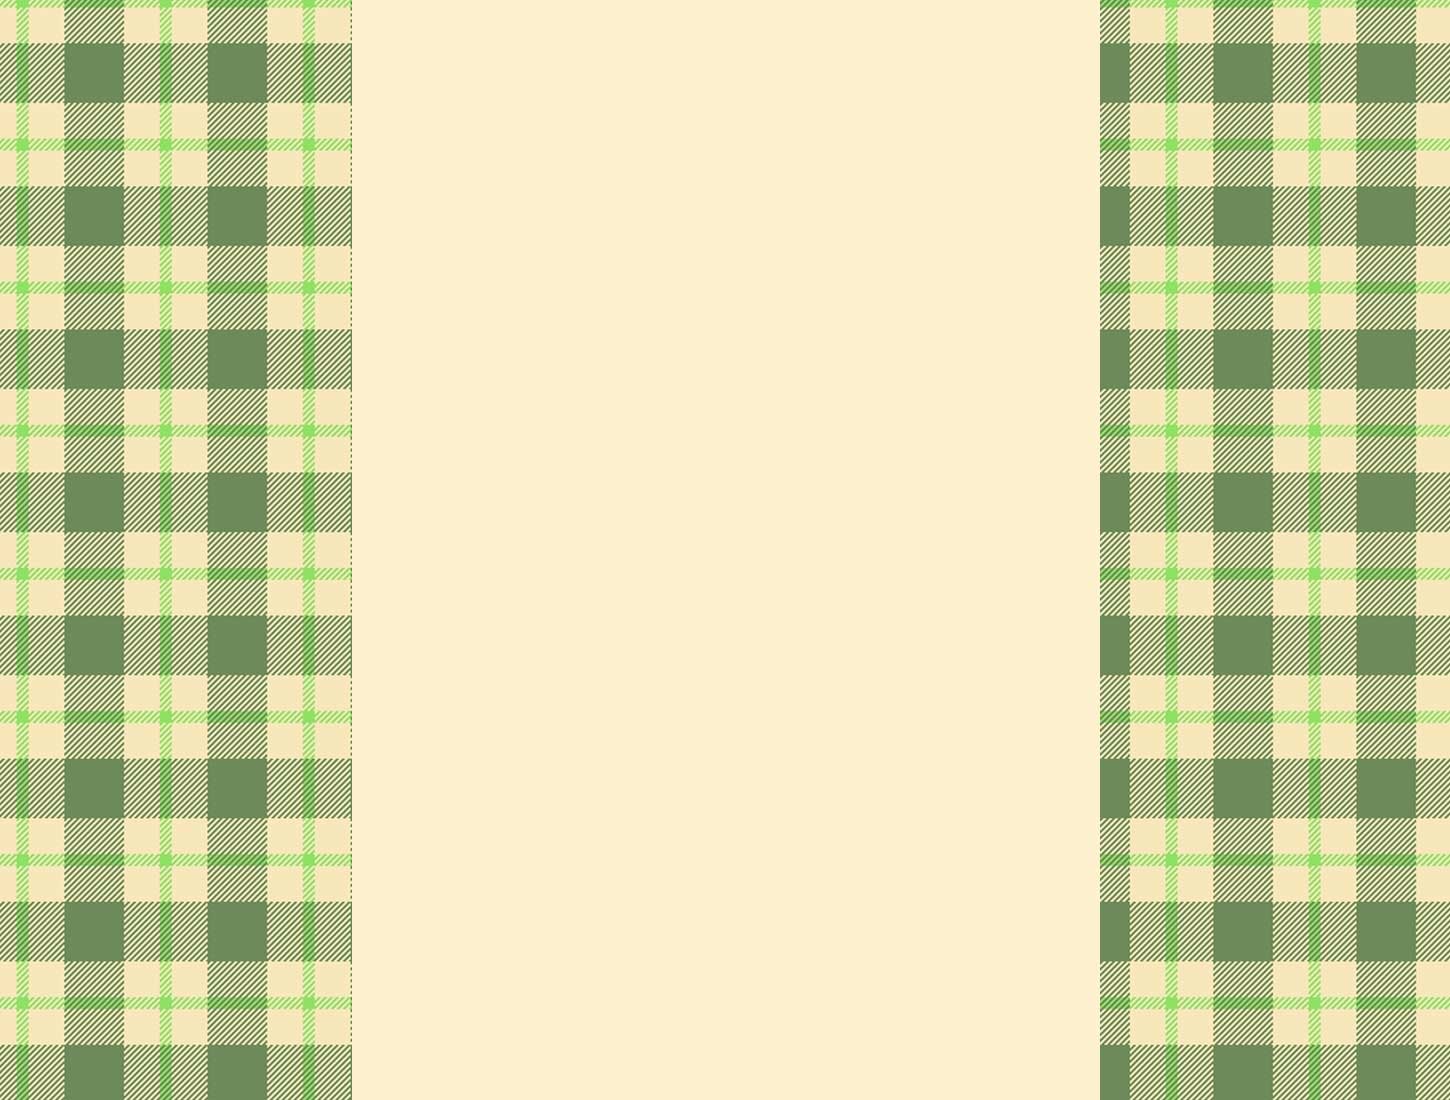  Green Plaidtartan Backgrounds For PowerPoint   Border and Frame 1450x1100